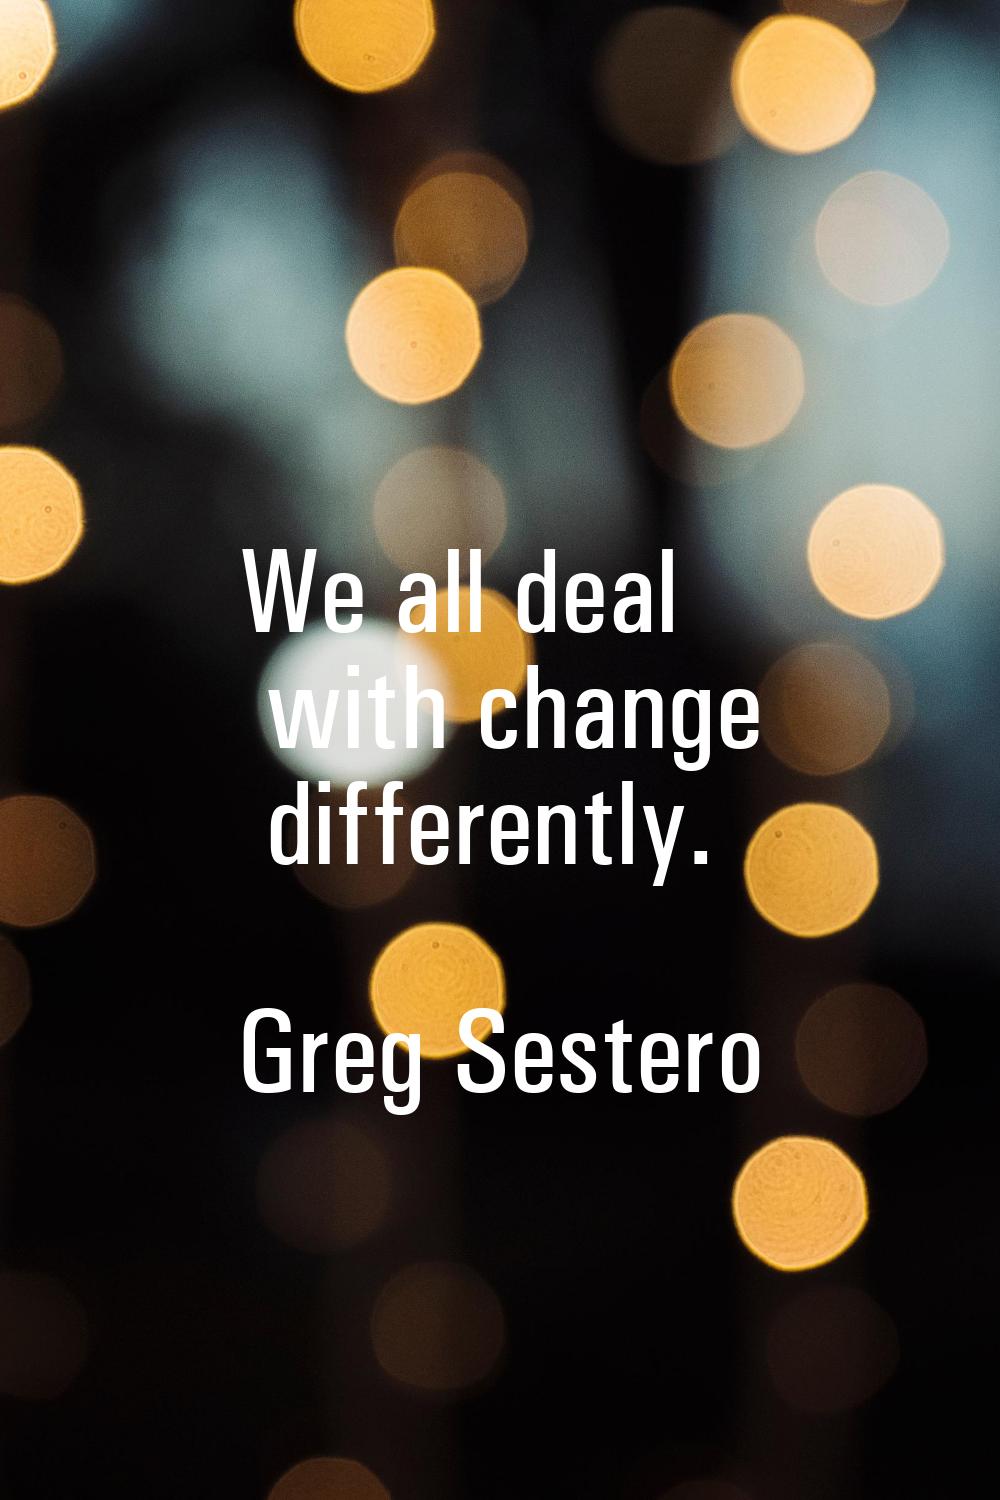 We all deal with change differently.